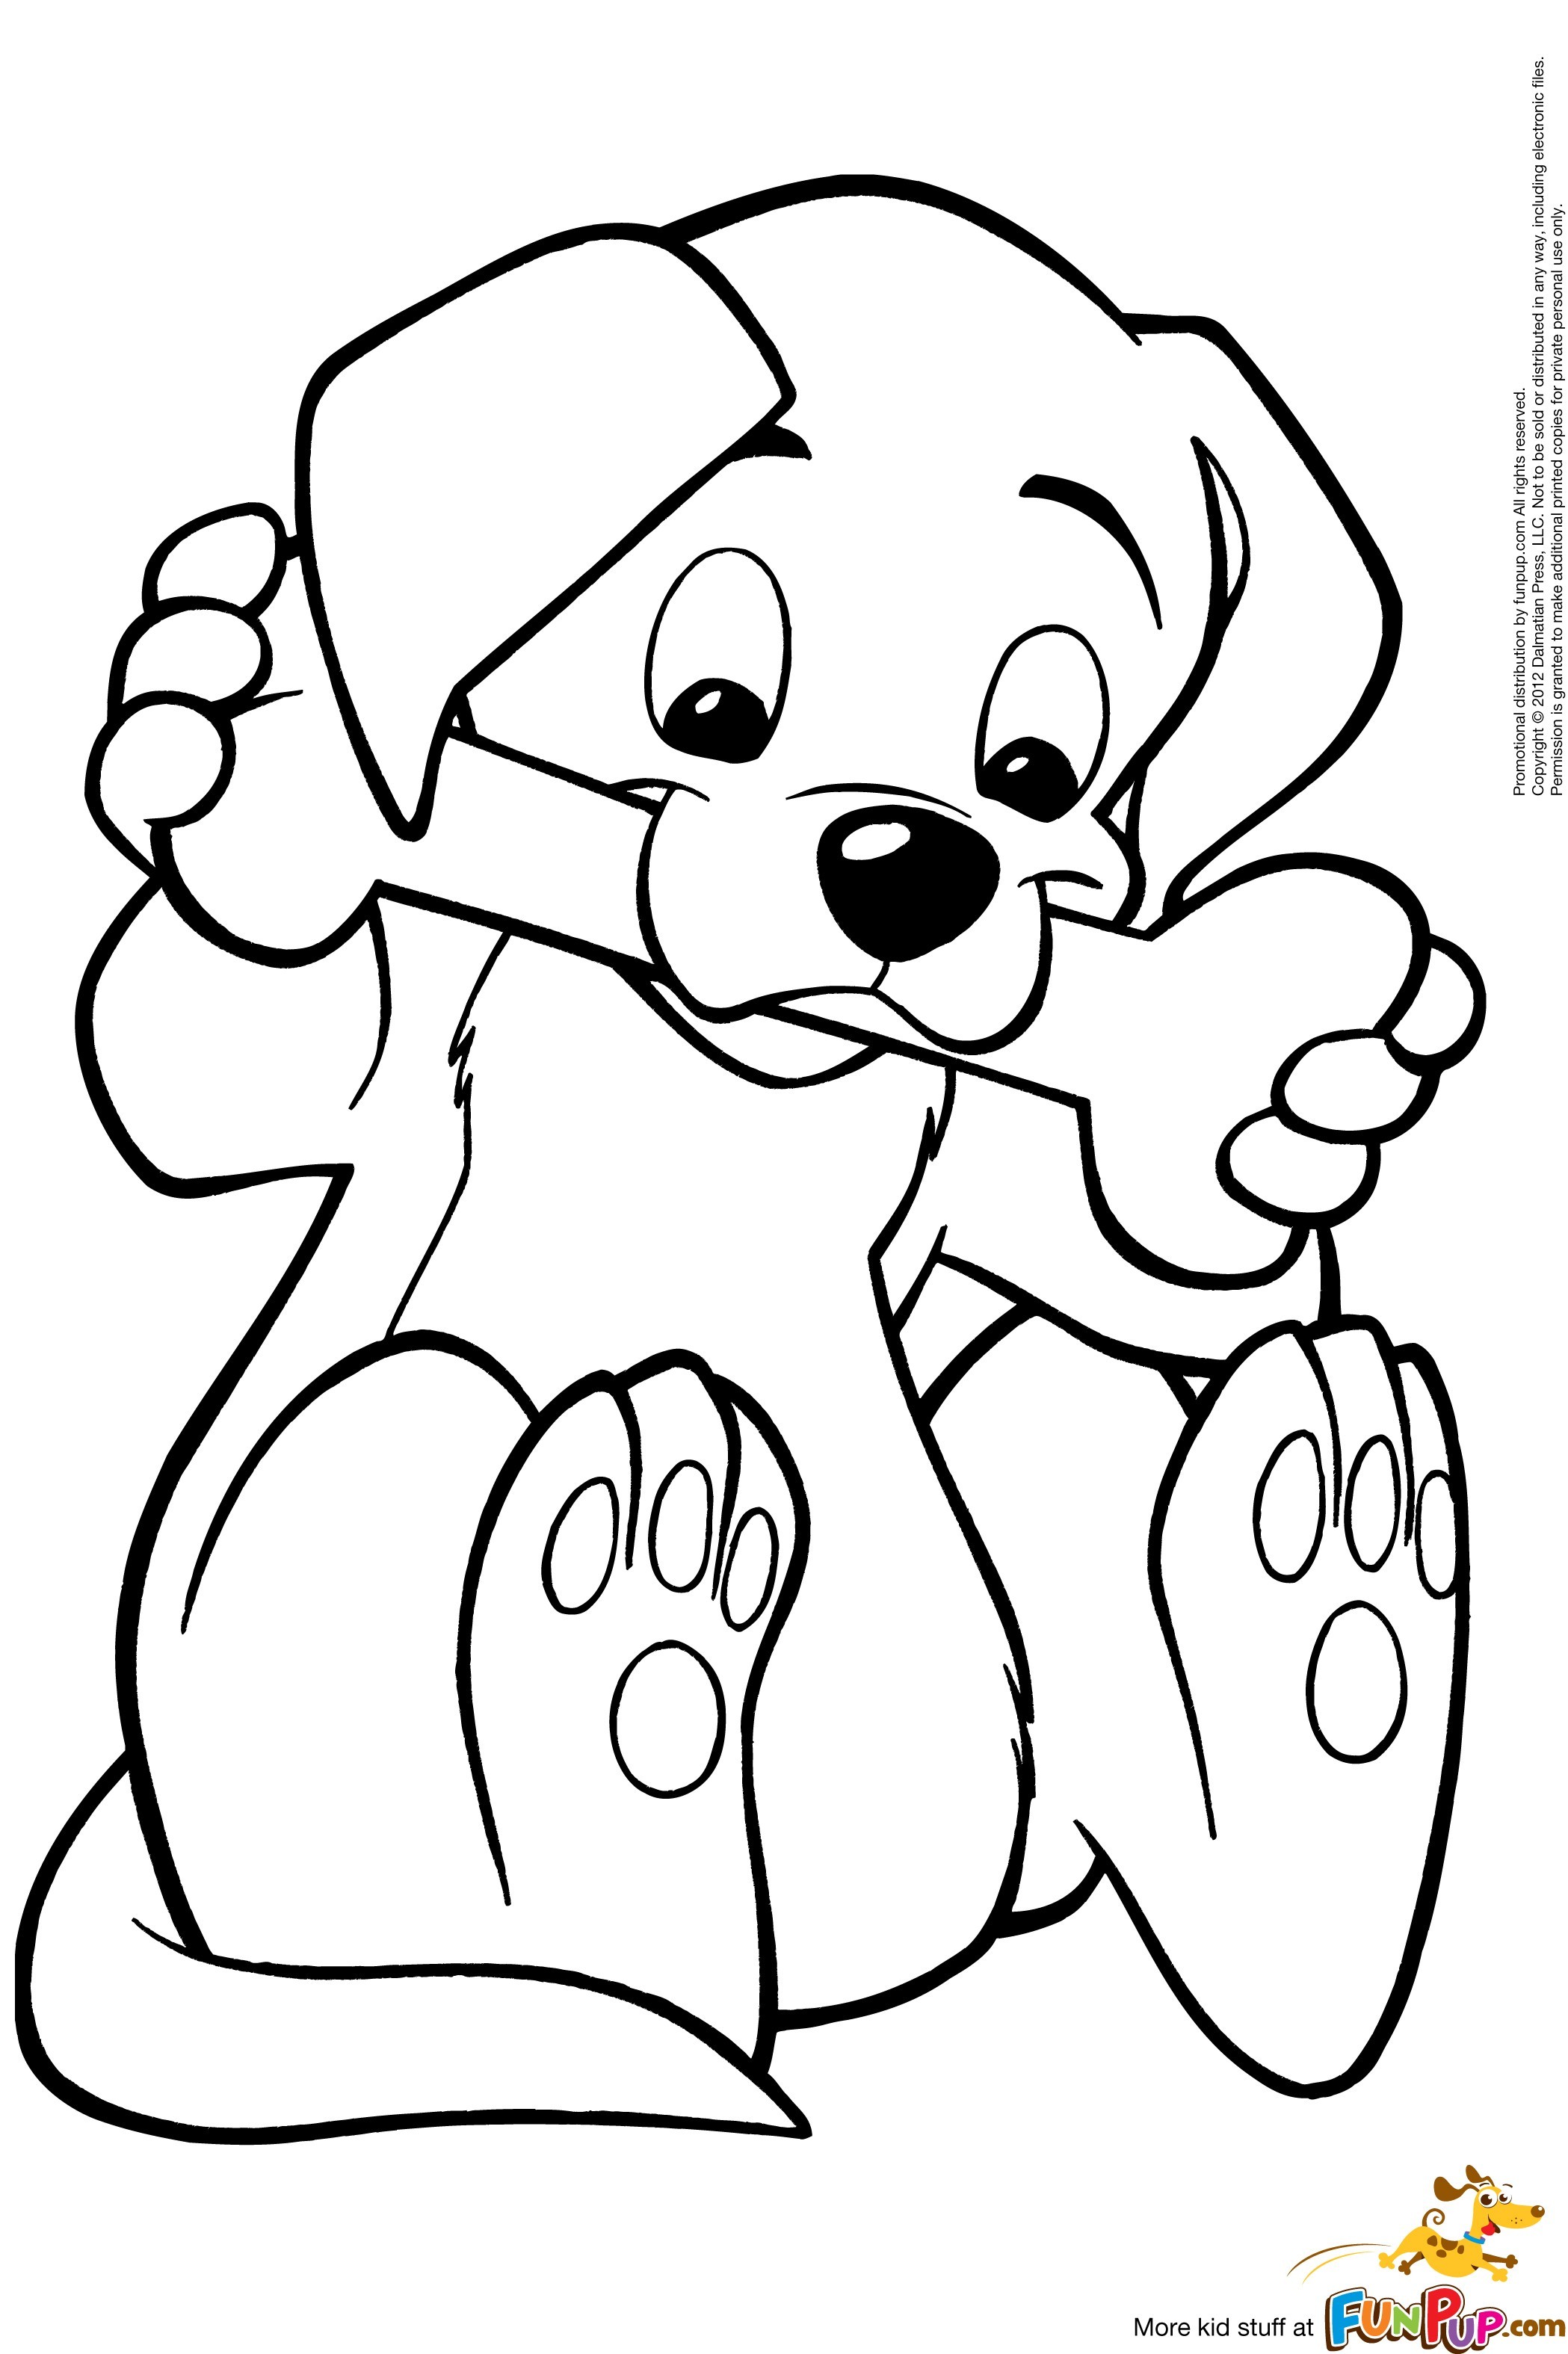 Cartoon Puppy Coloring Pages at GetDrawings | Free download